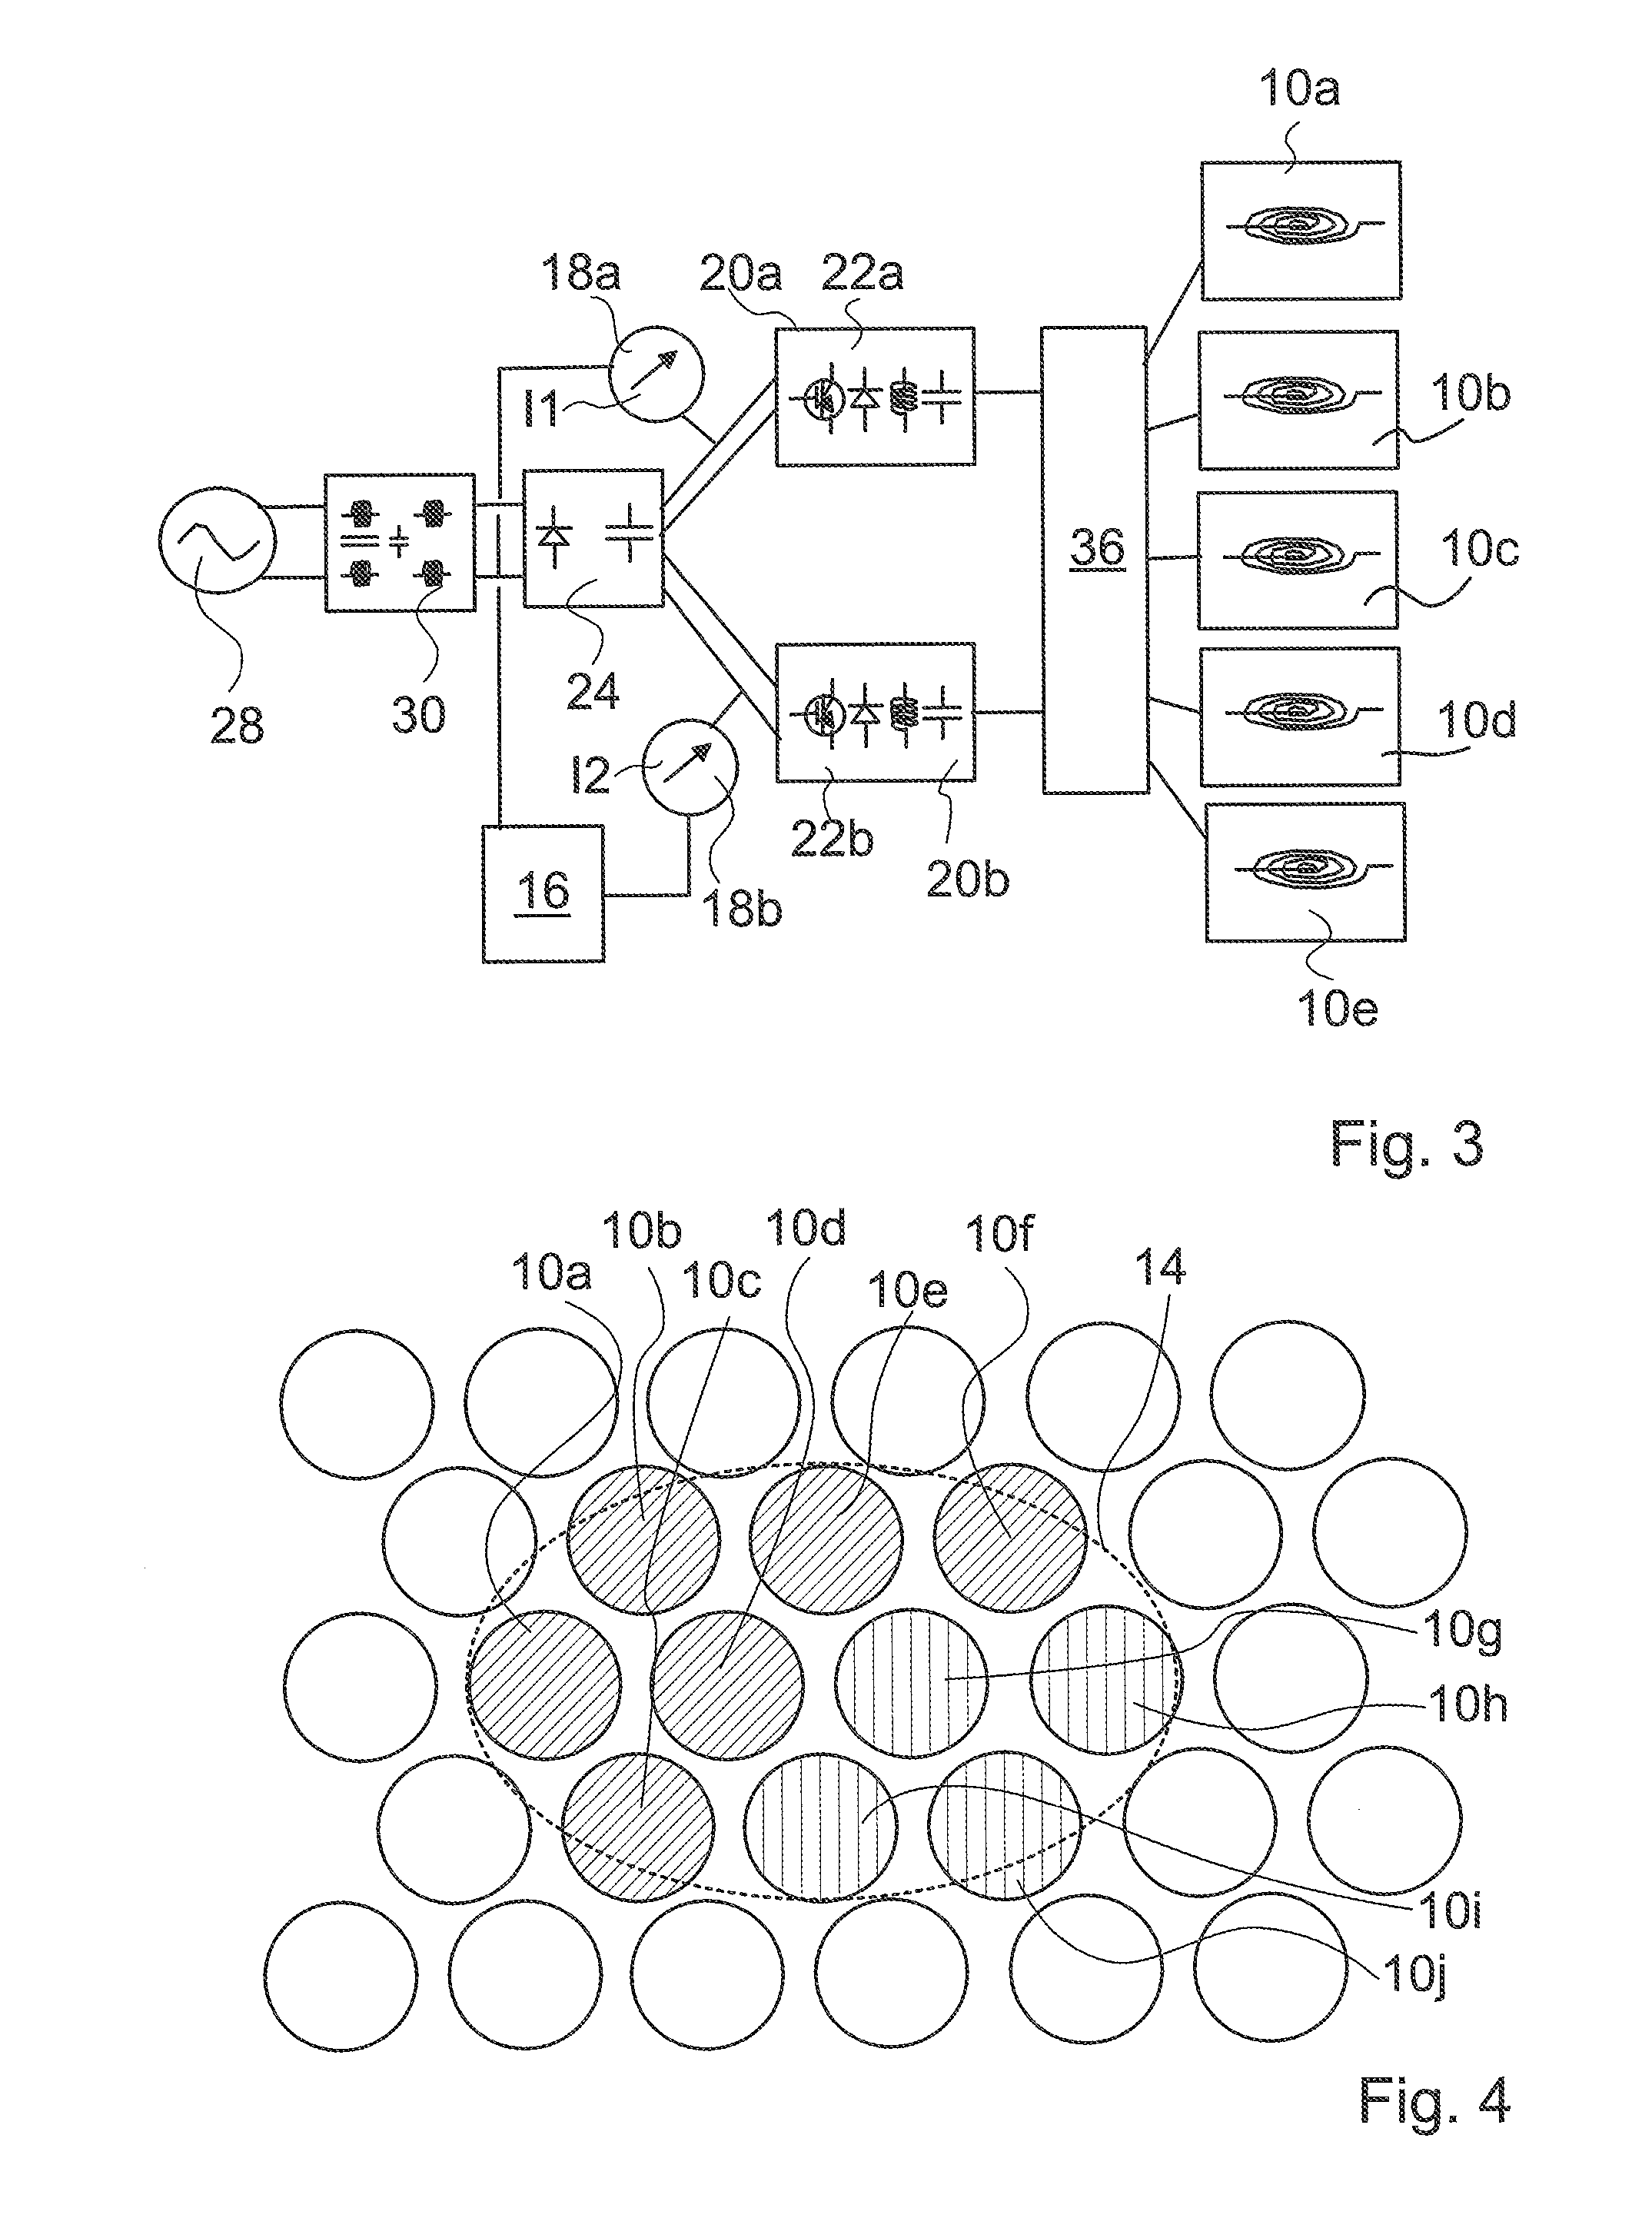 Induction HOB comprising a plurality of induction heaters